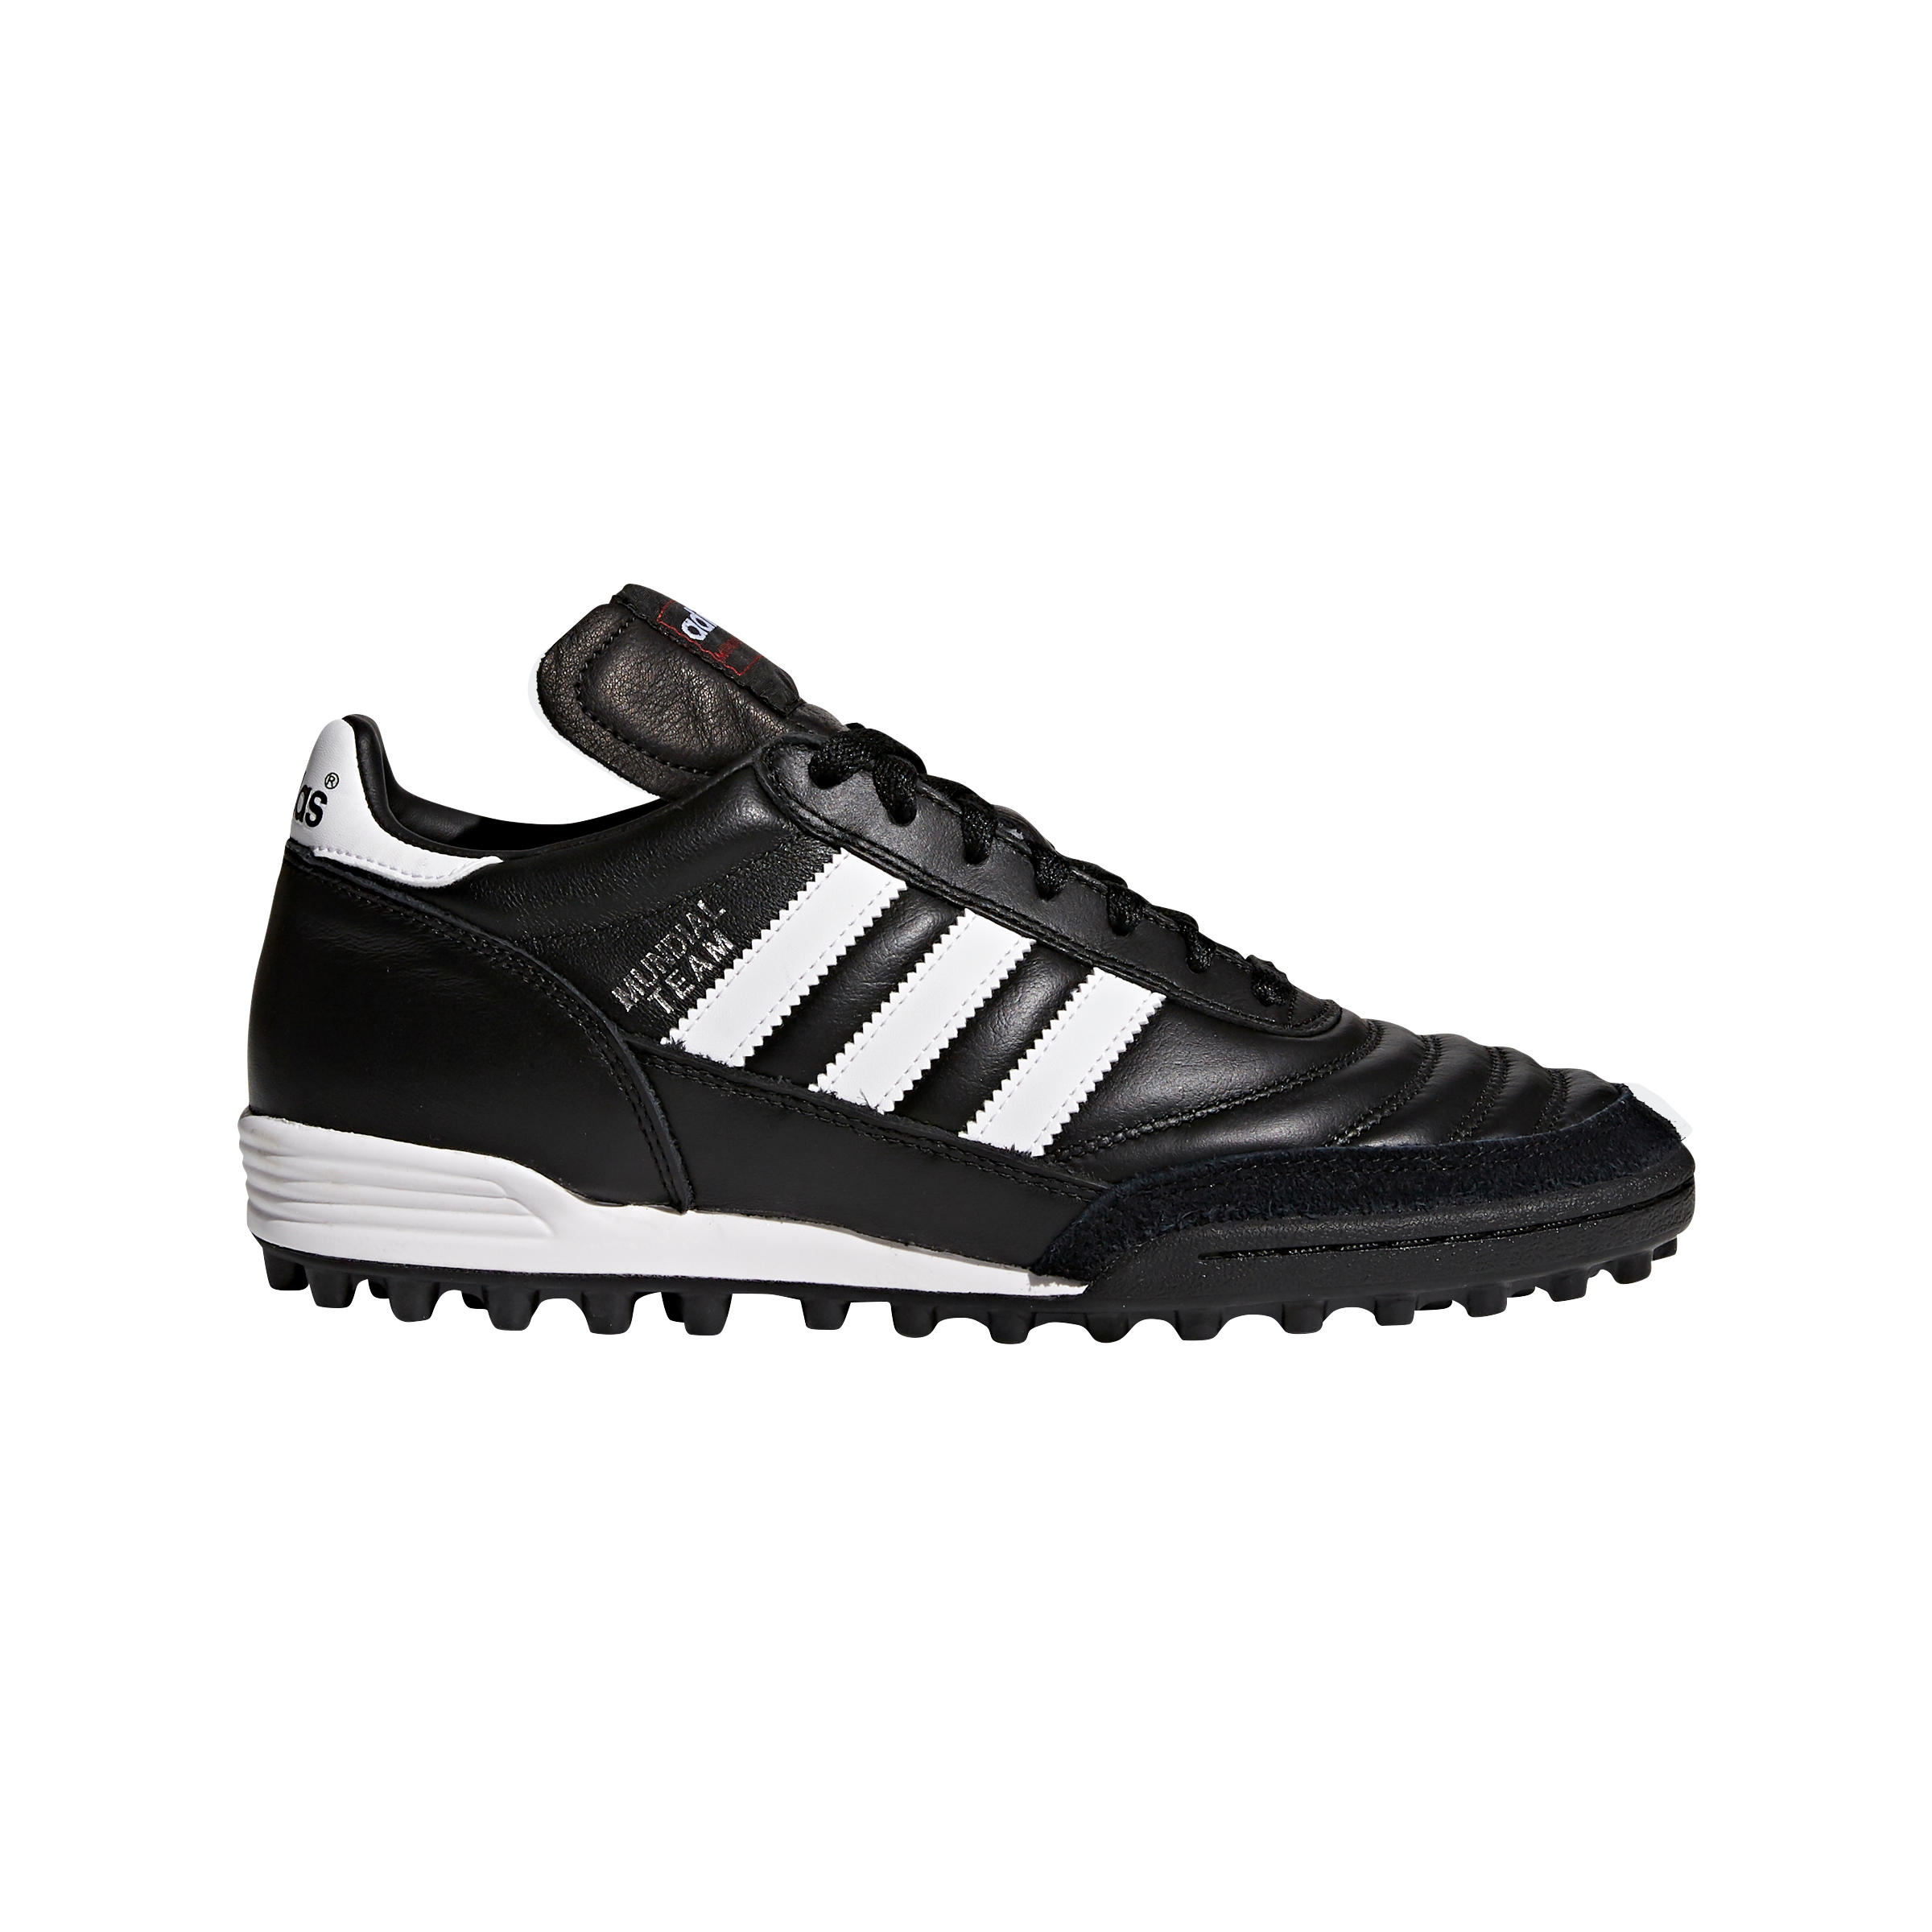 weightlifting adidas men's adipower weightlift shoes